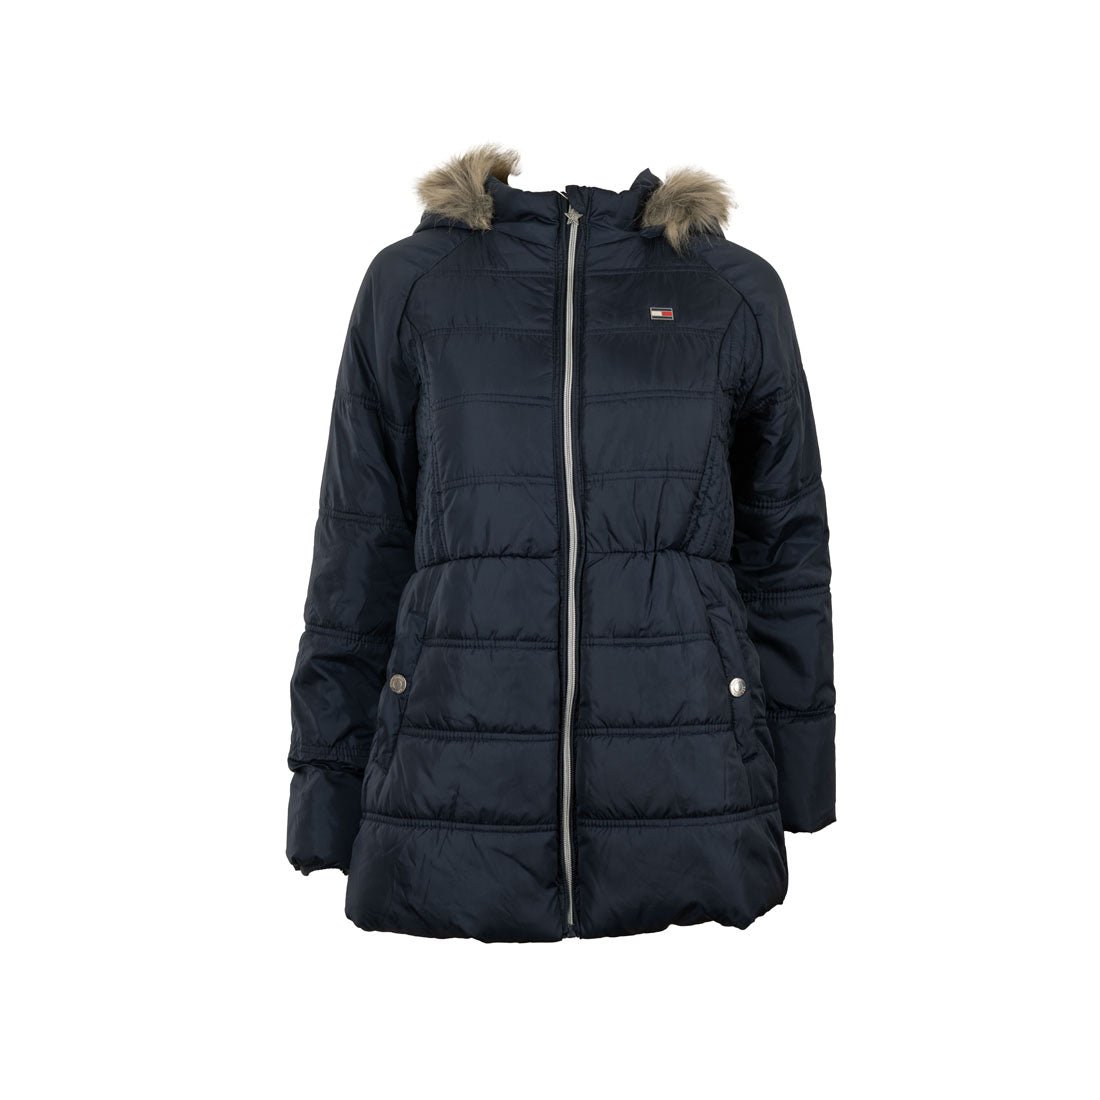 Tommy Hilfiger Brand New Waterproof Jacket For Boys - mymadstore.com